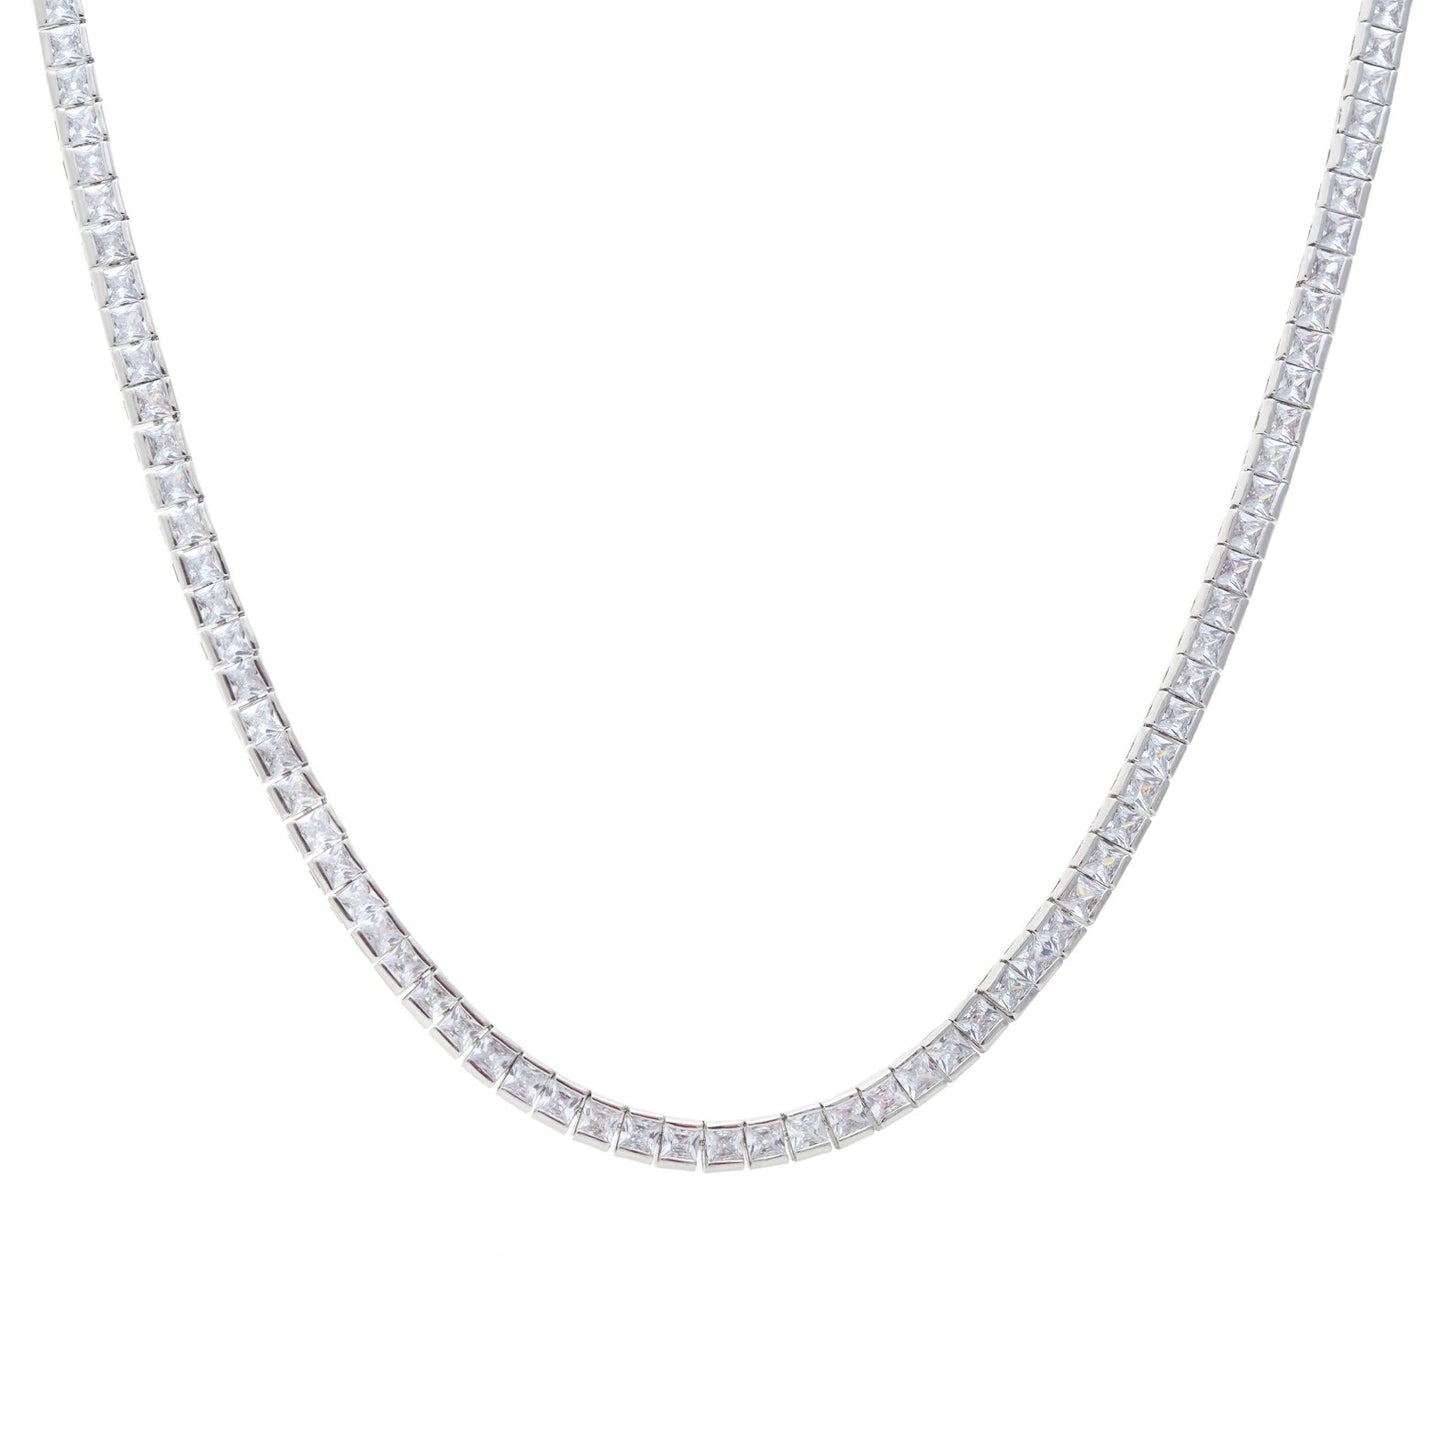 Tennis necklace with white squares zirconia 23.6 inch (Riviera)